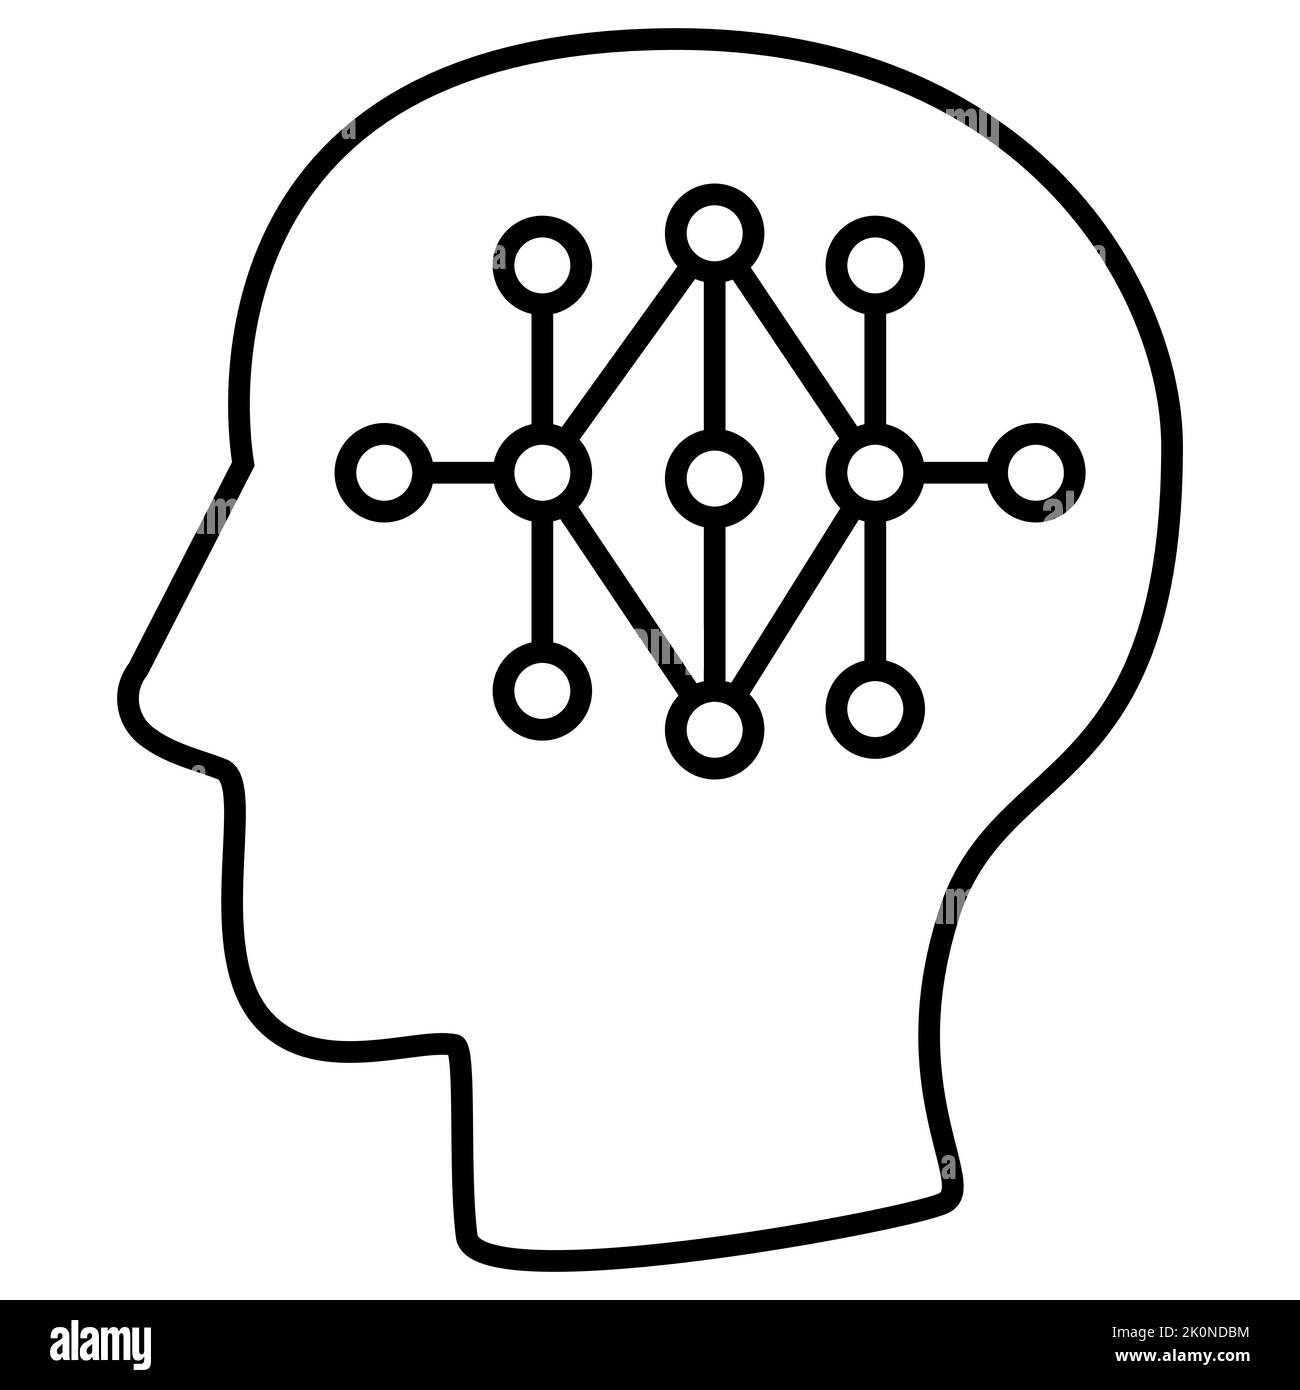 Robot brain artificial intelligent neuron network. Simple line icon drawing for robotic and AI technology concept design Stock Vector